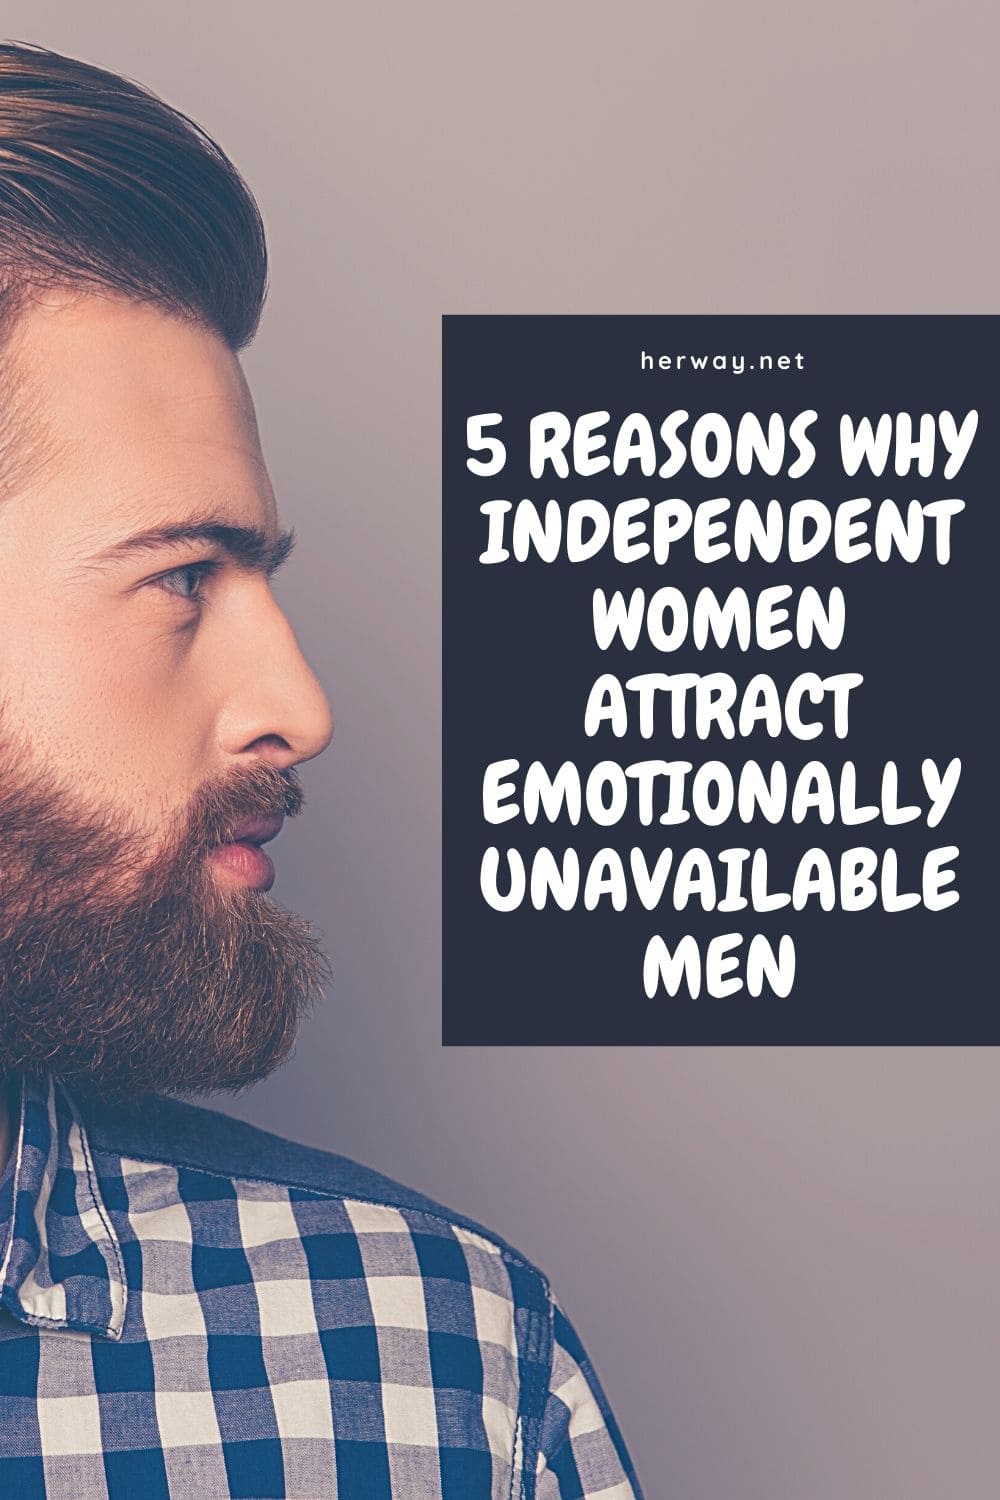 5 Reasons Why Independent Women Attract Emotionally Unavailable Men